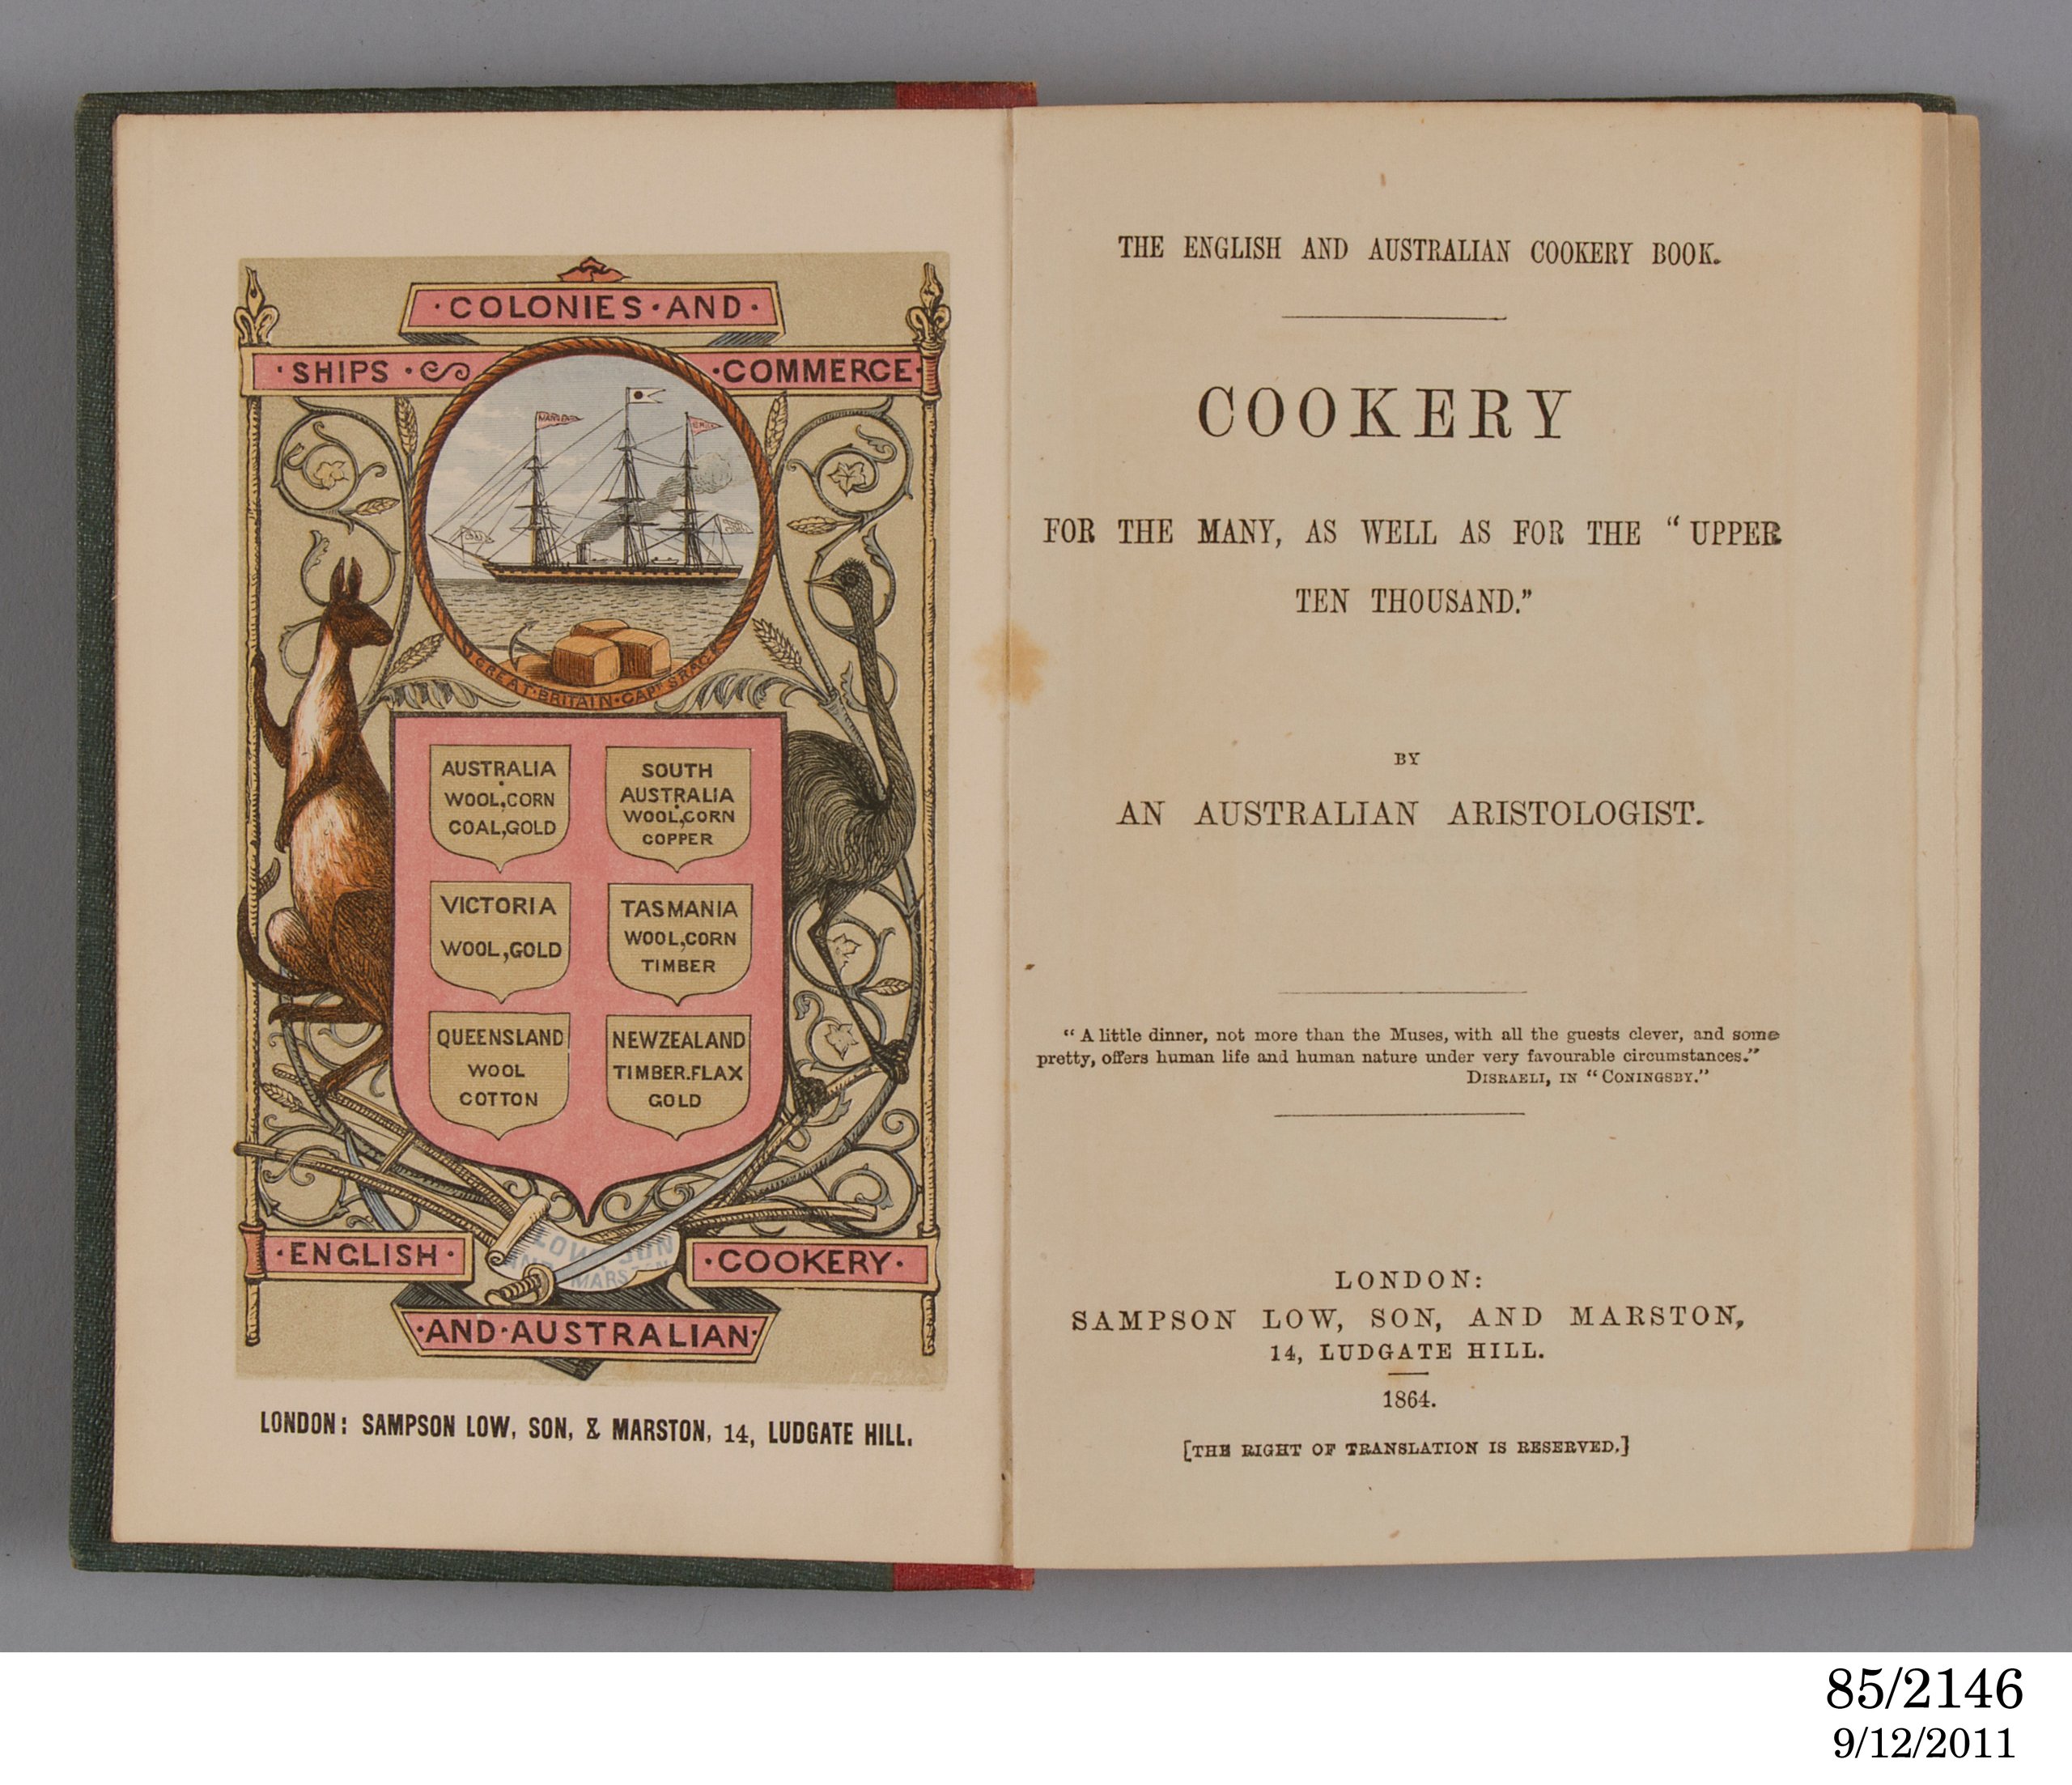 The English and Australian Cookery Book by Edward Abbott